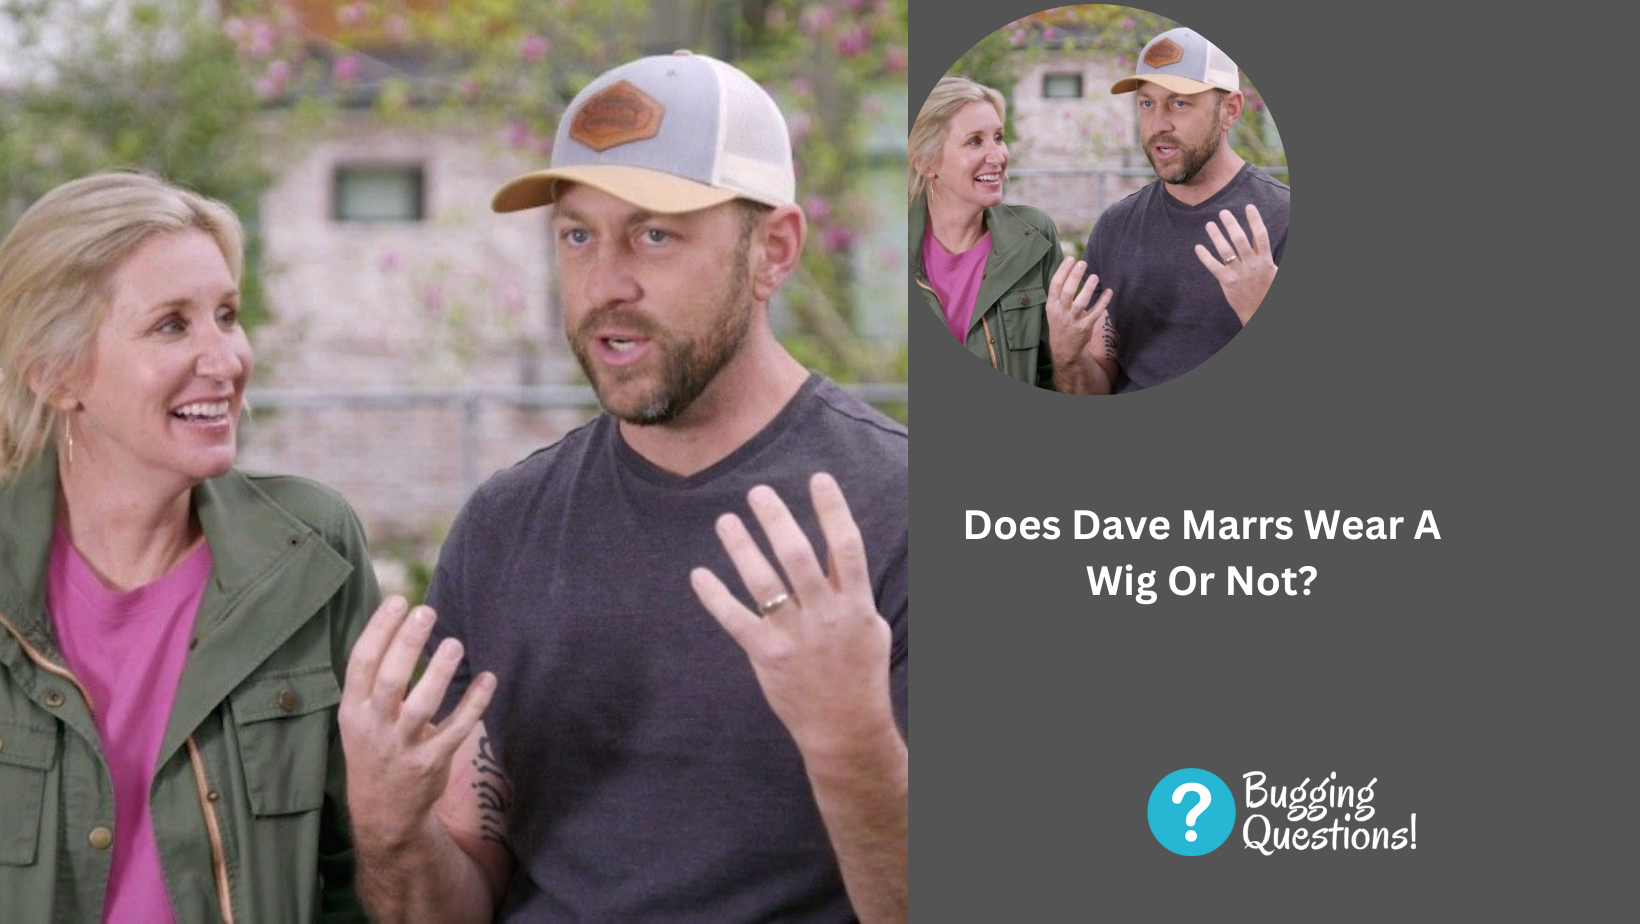 Does Dave Marrs Wear A Wig Or Not?